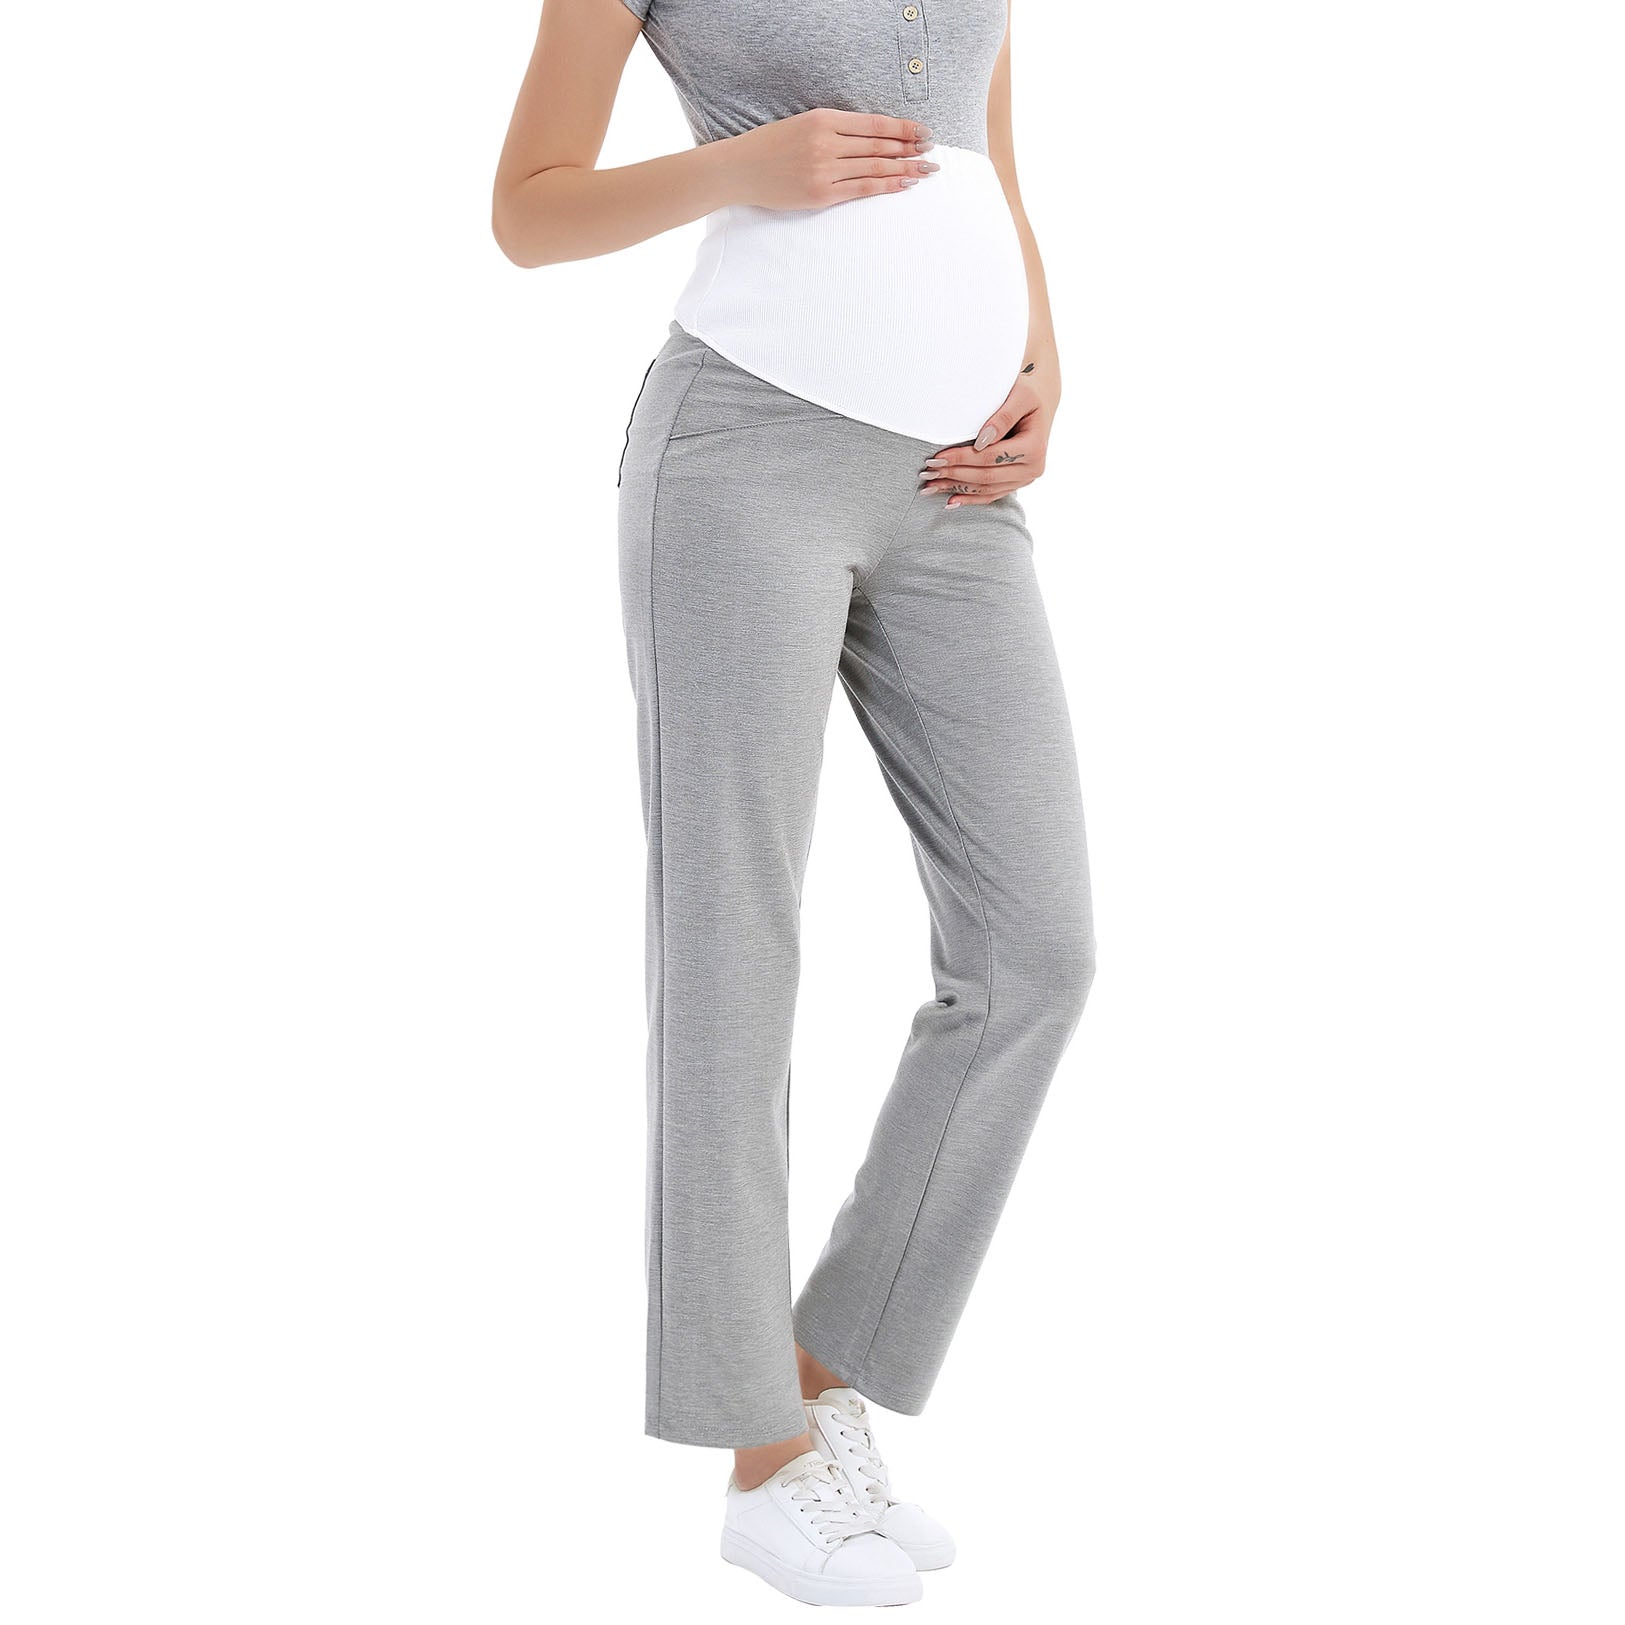 Women's Maternity Pants Stretch Career Pants Work Office Trousers Maternity  Overalls Pants Black at Amazon Women's Clothing store